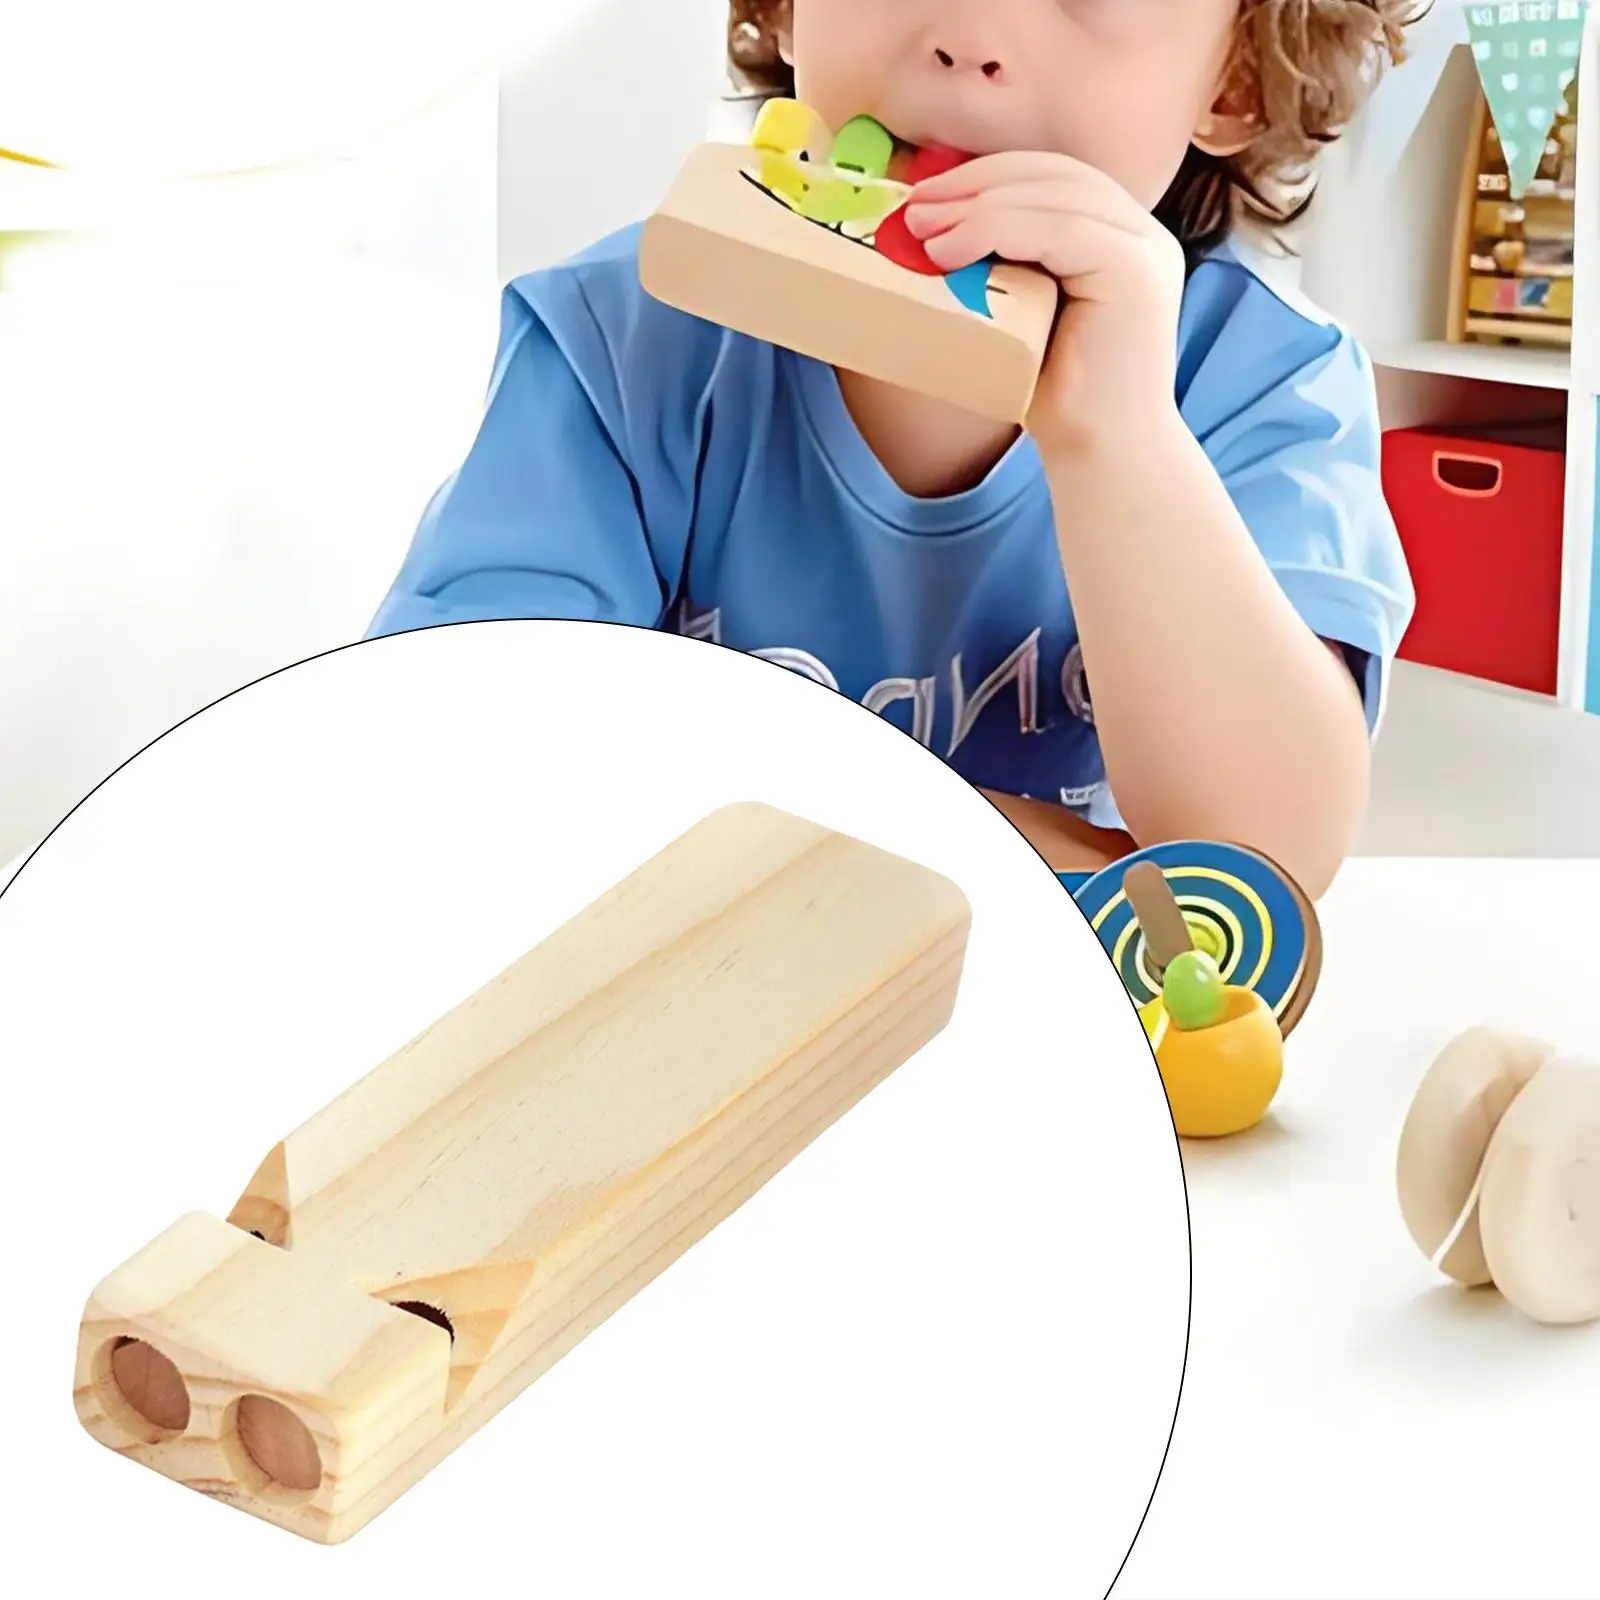 

Kids Wooden Train Whistle Toy Musical Train Whistle Teaching Aid Learning Activities Solid Wood Train Whistle Wooden Whistle